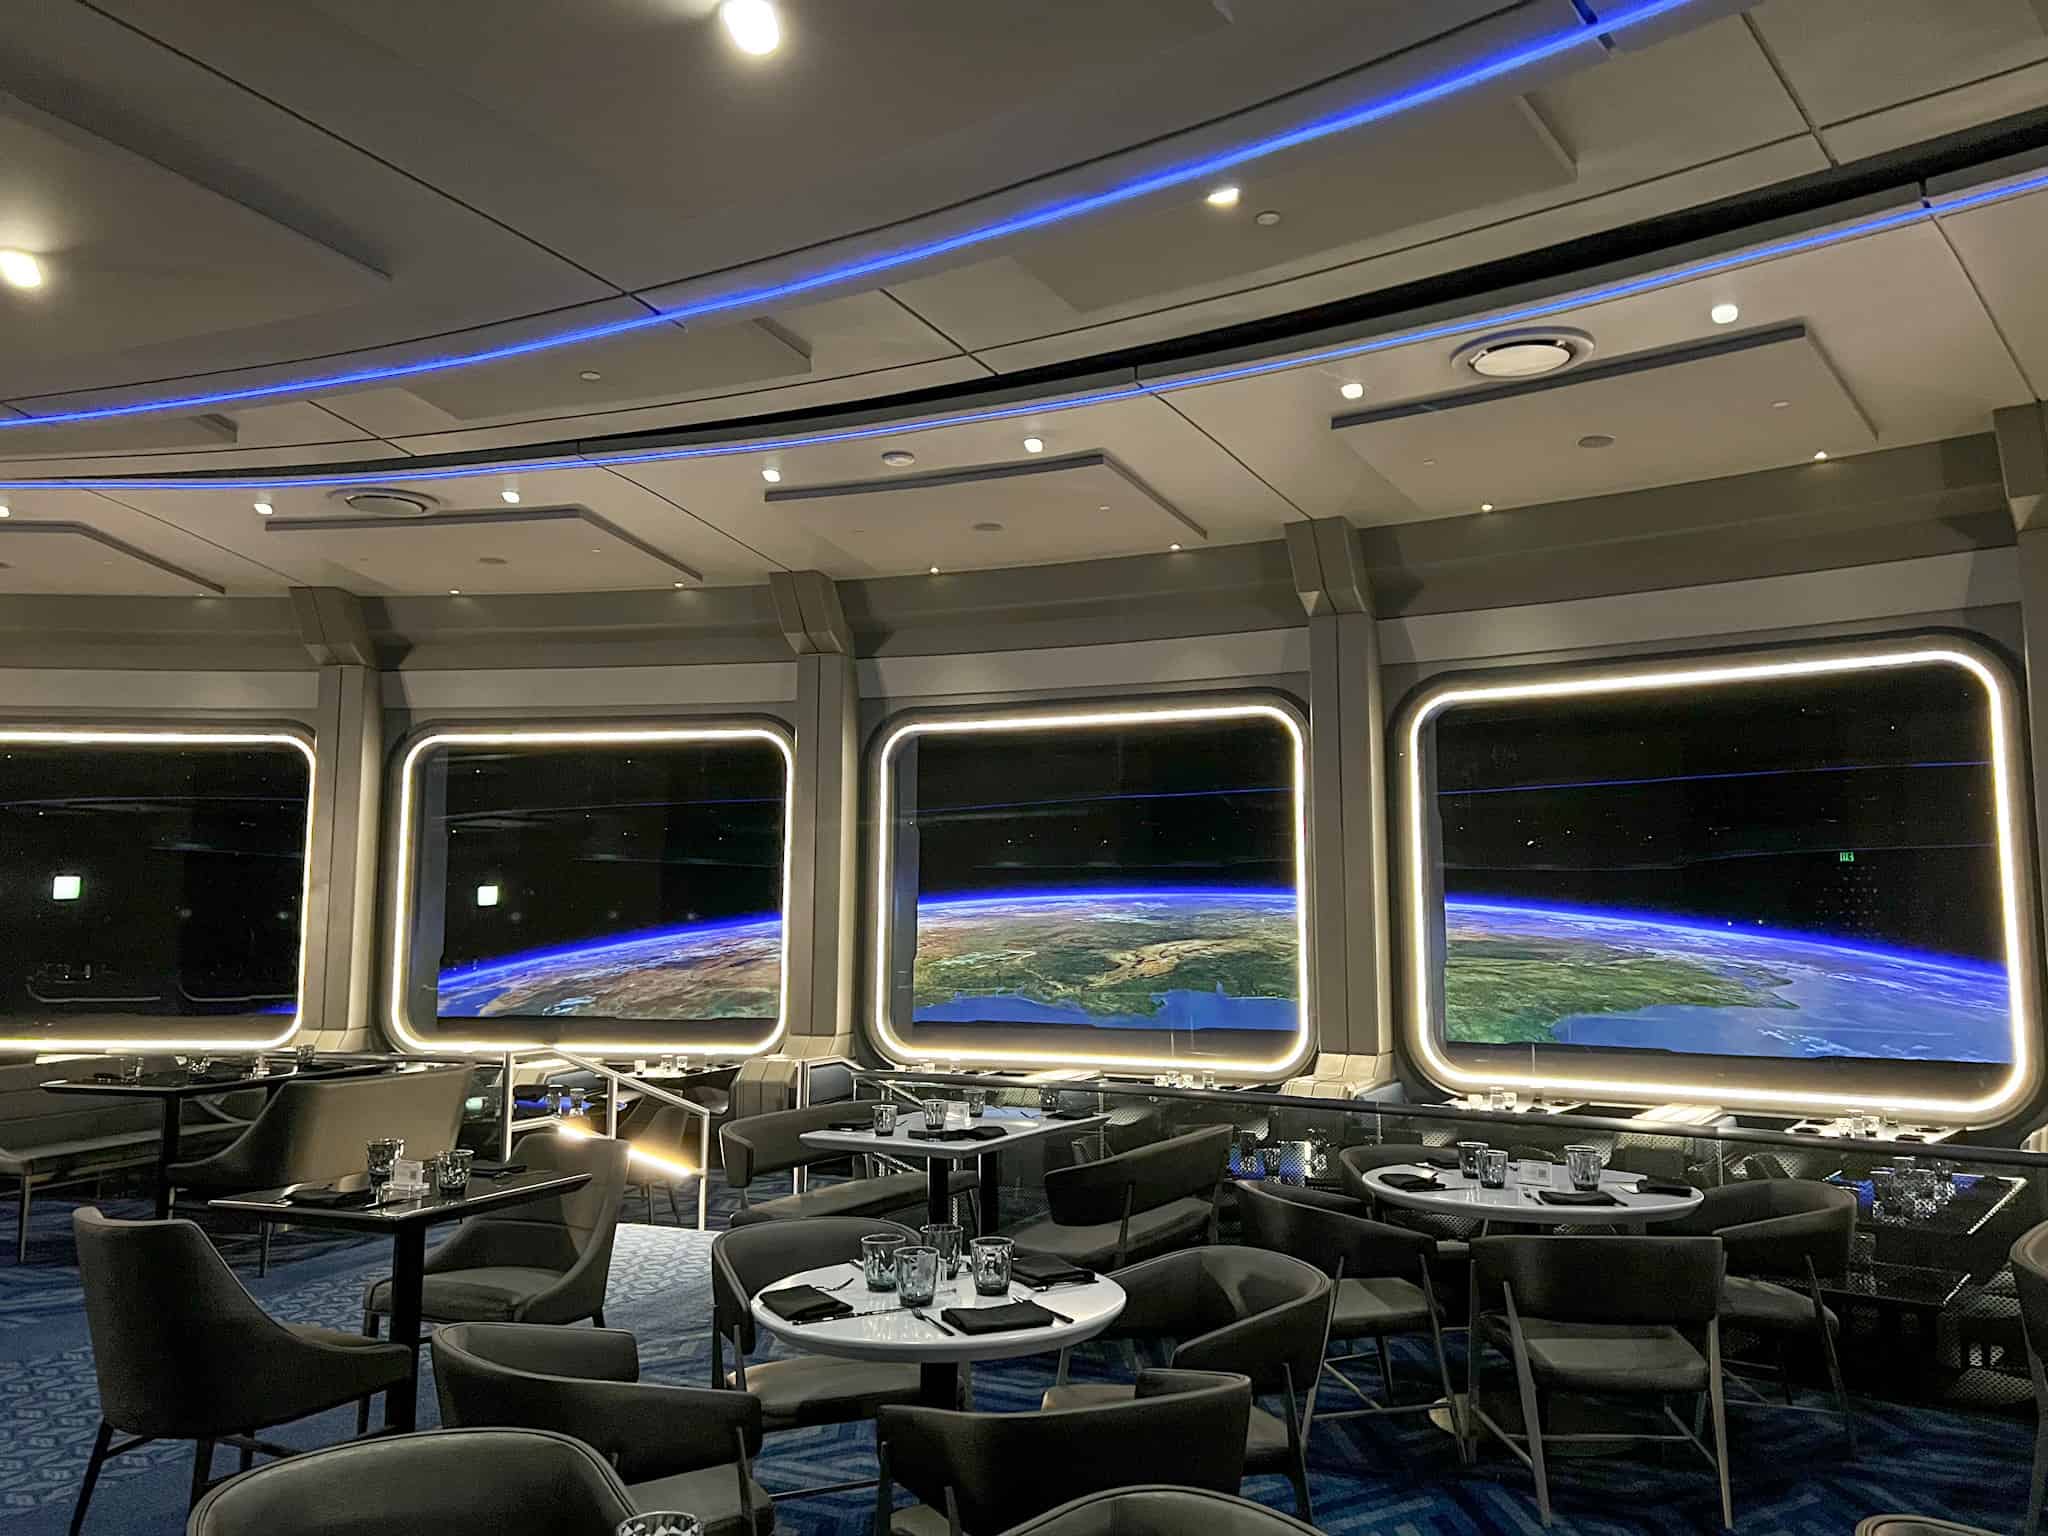 Space 220 Restaurant at EPCOT - Dining Room